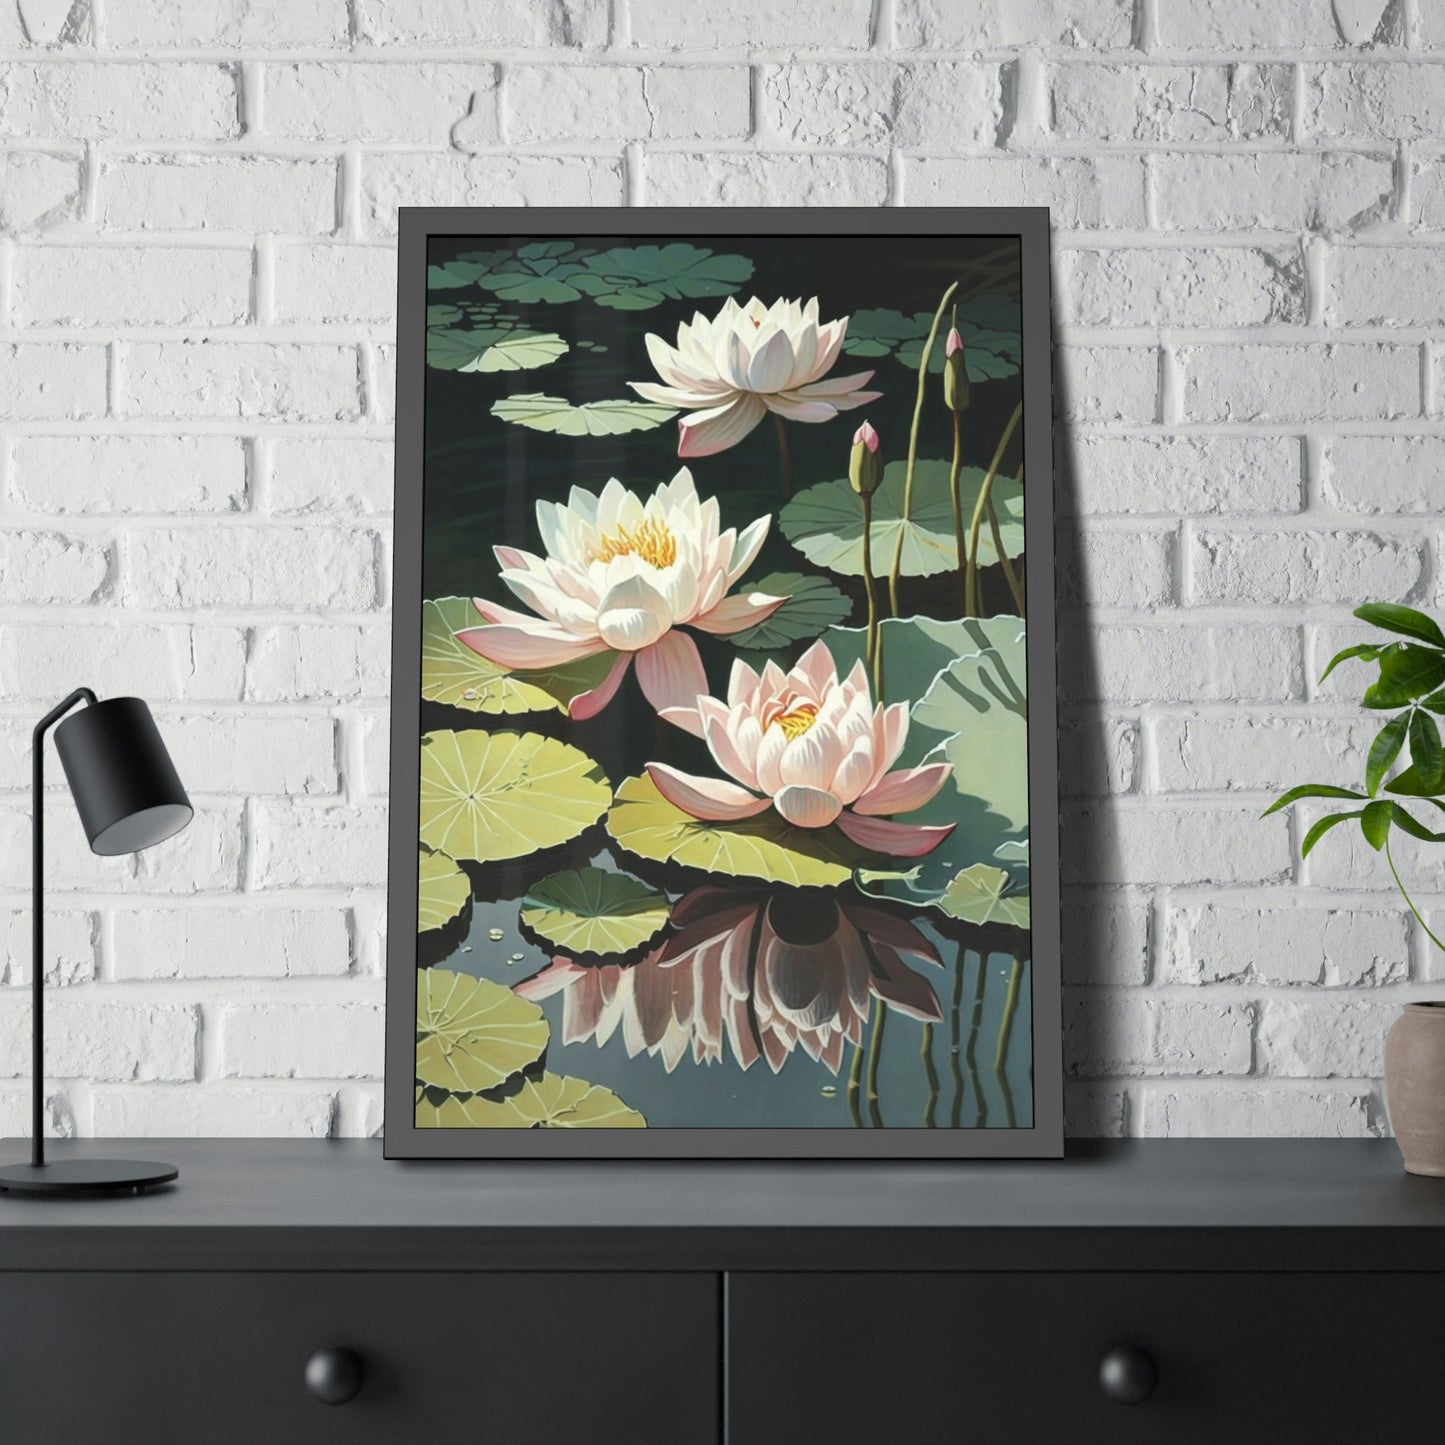 Lotus Dreamscape: Mesmerizing Framed Canvas and Print